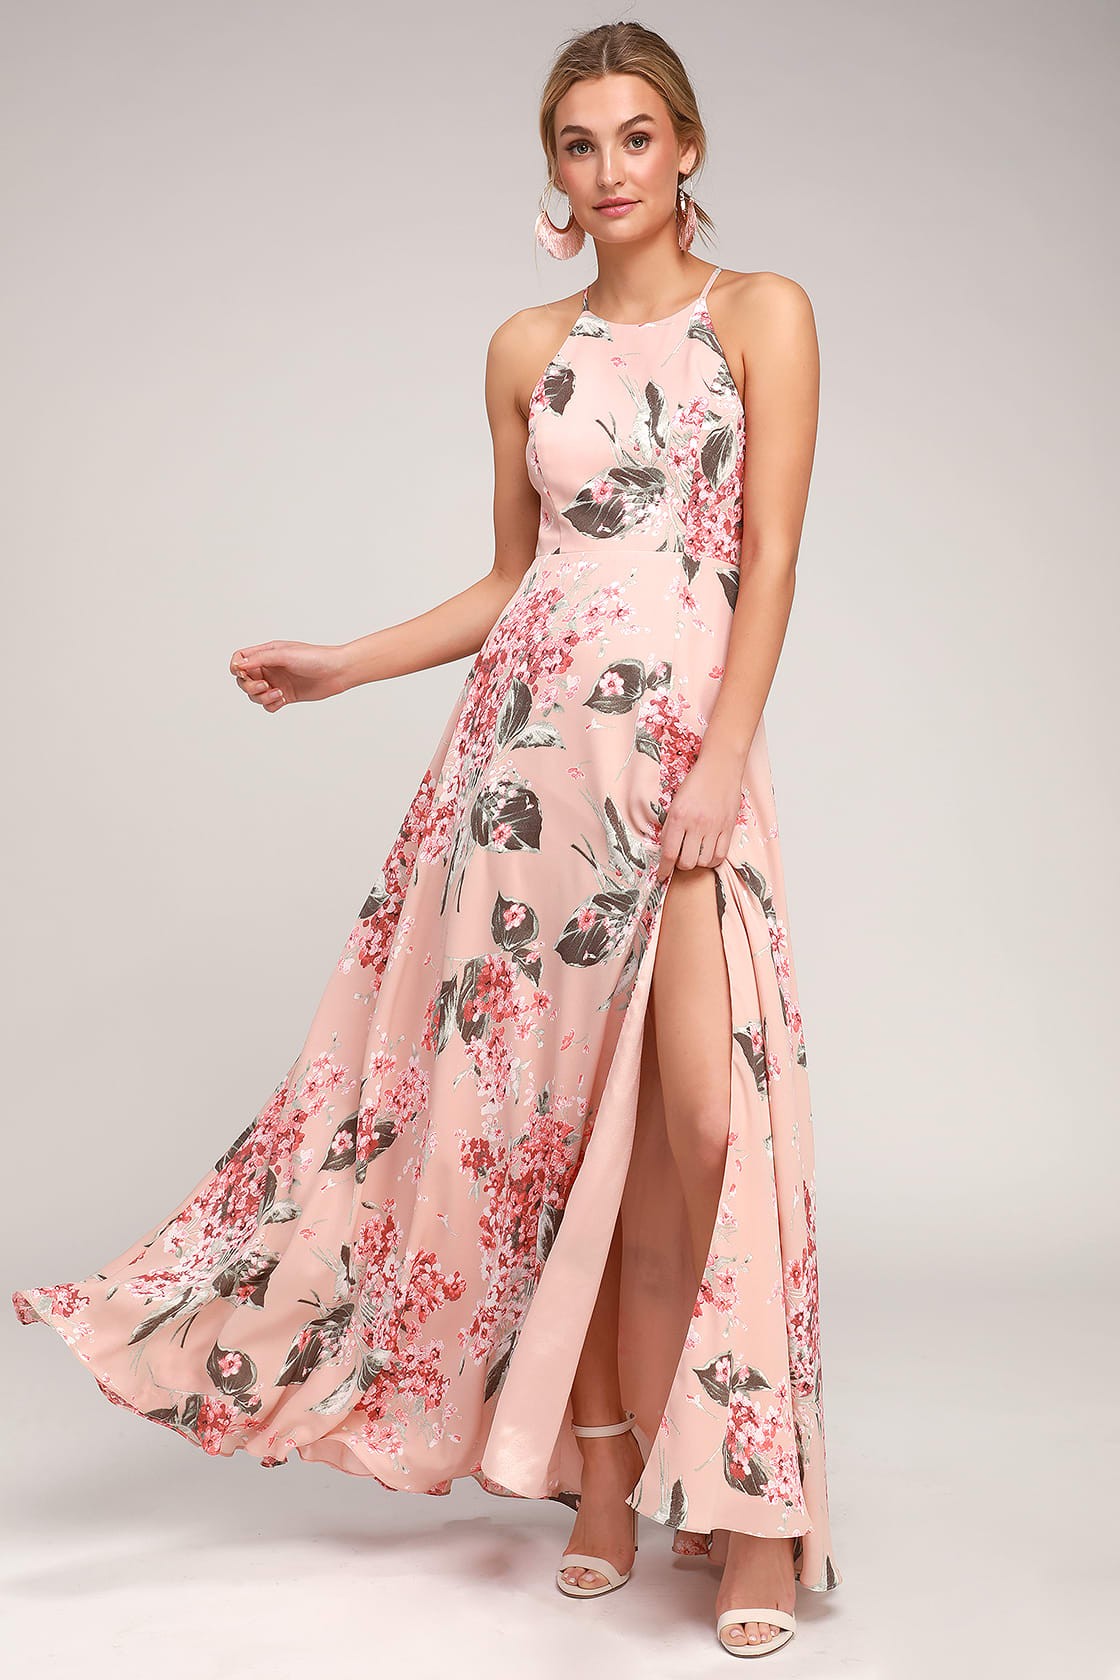 floral maxi dresses for weddings